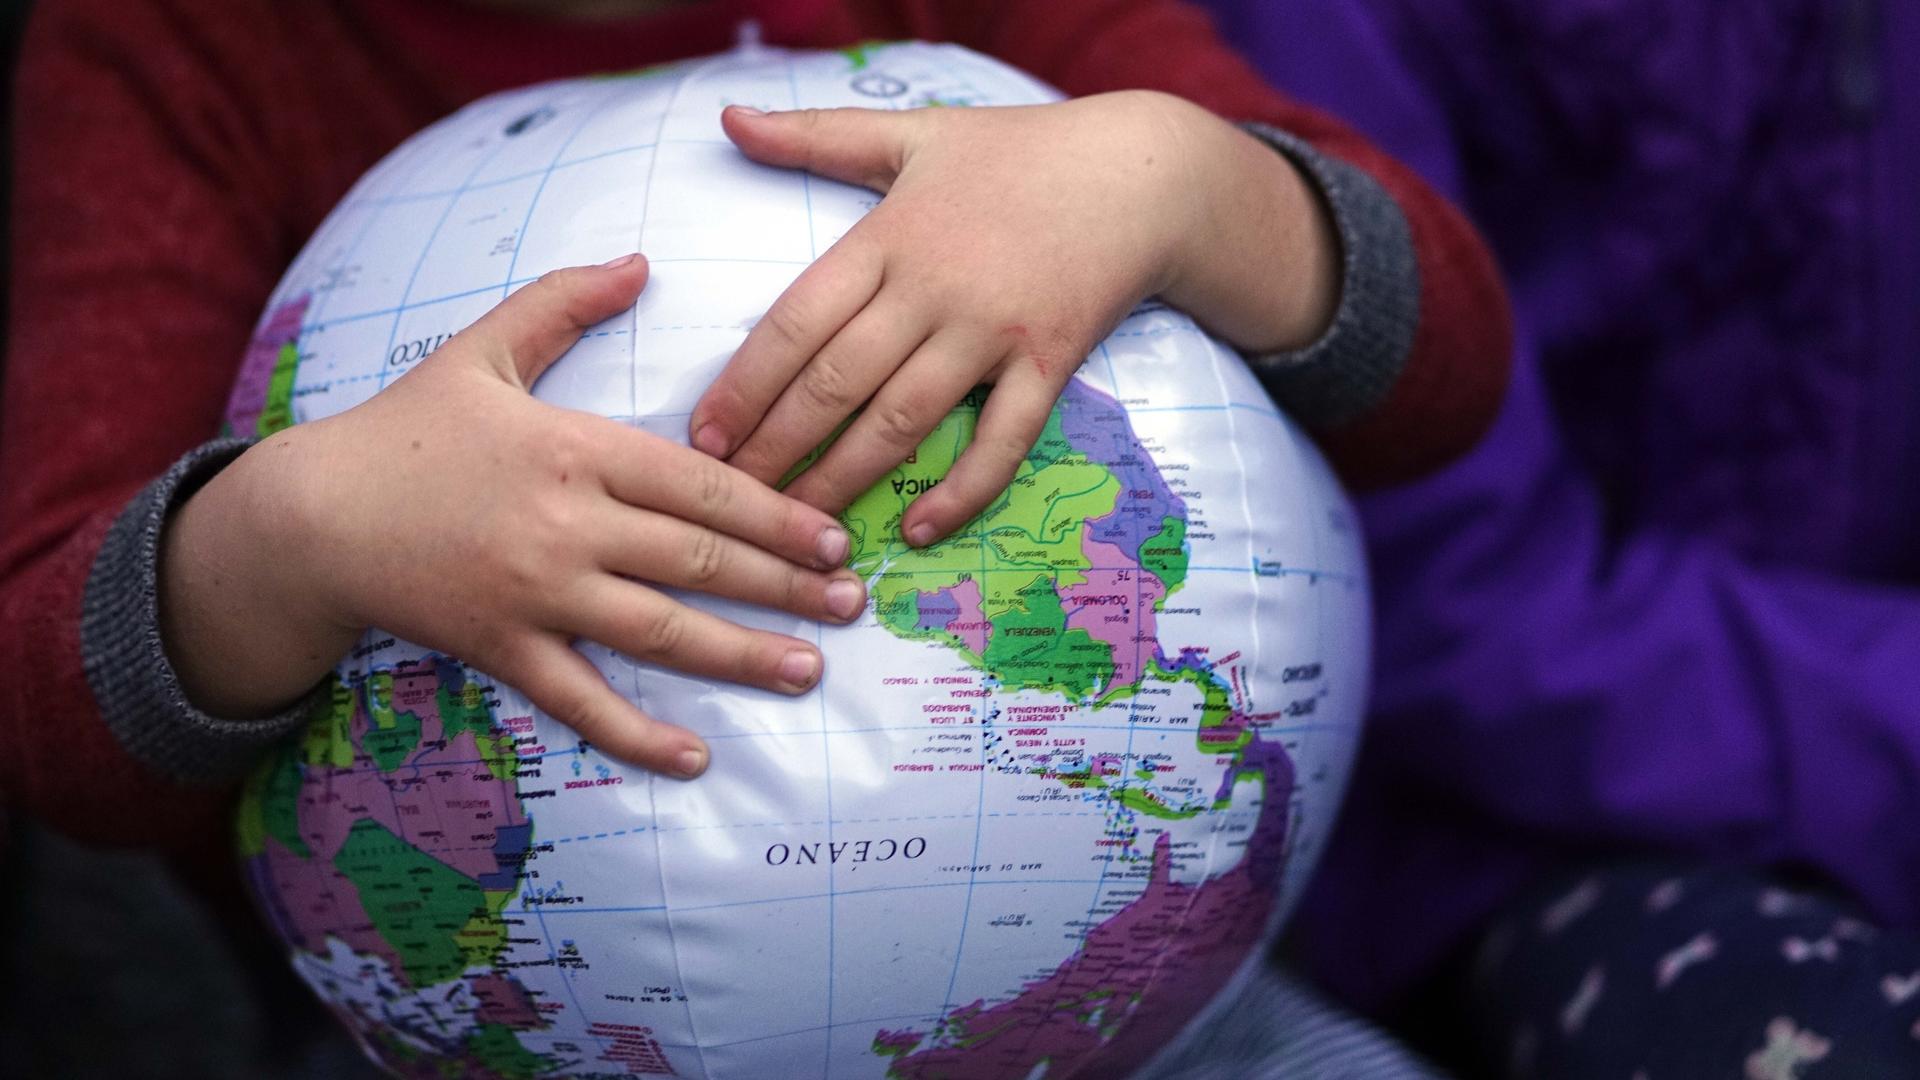 Child holds onto an inflatable globe